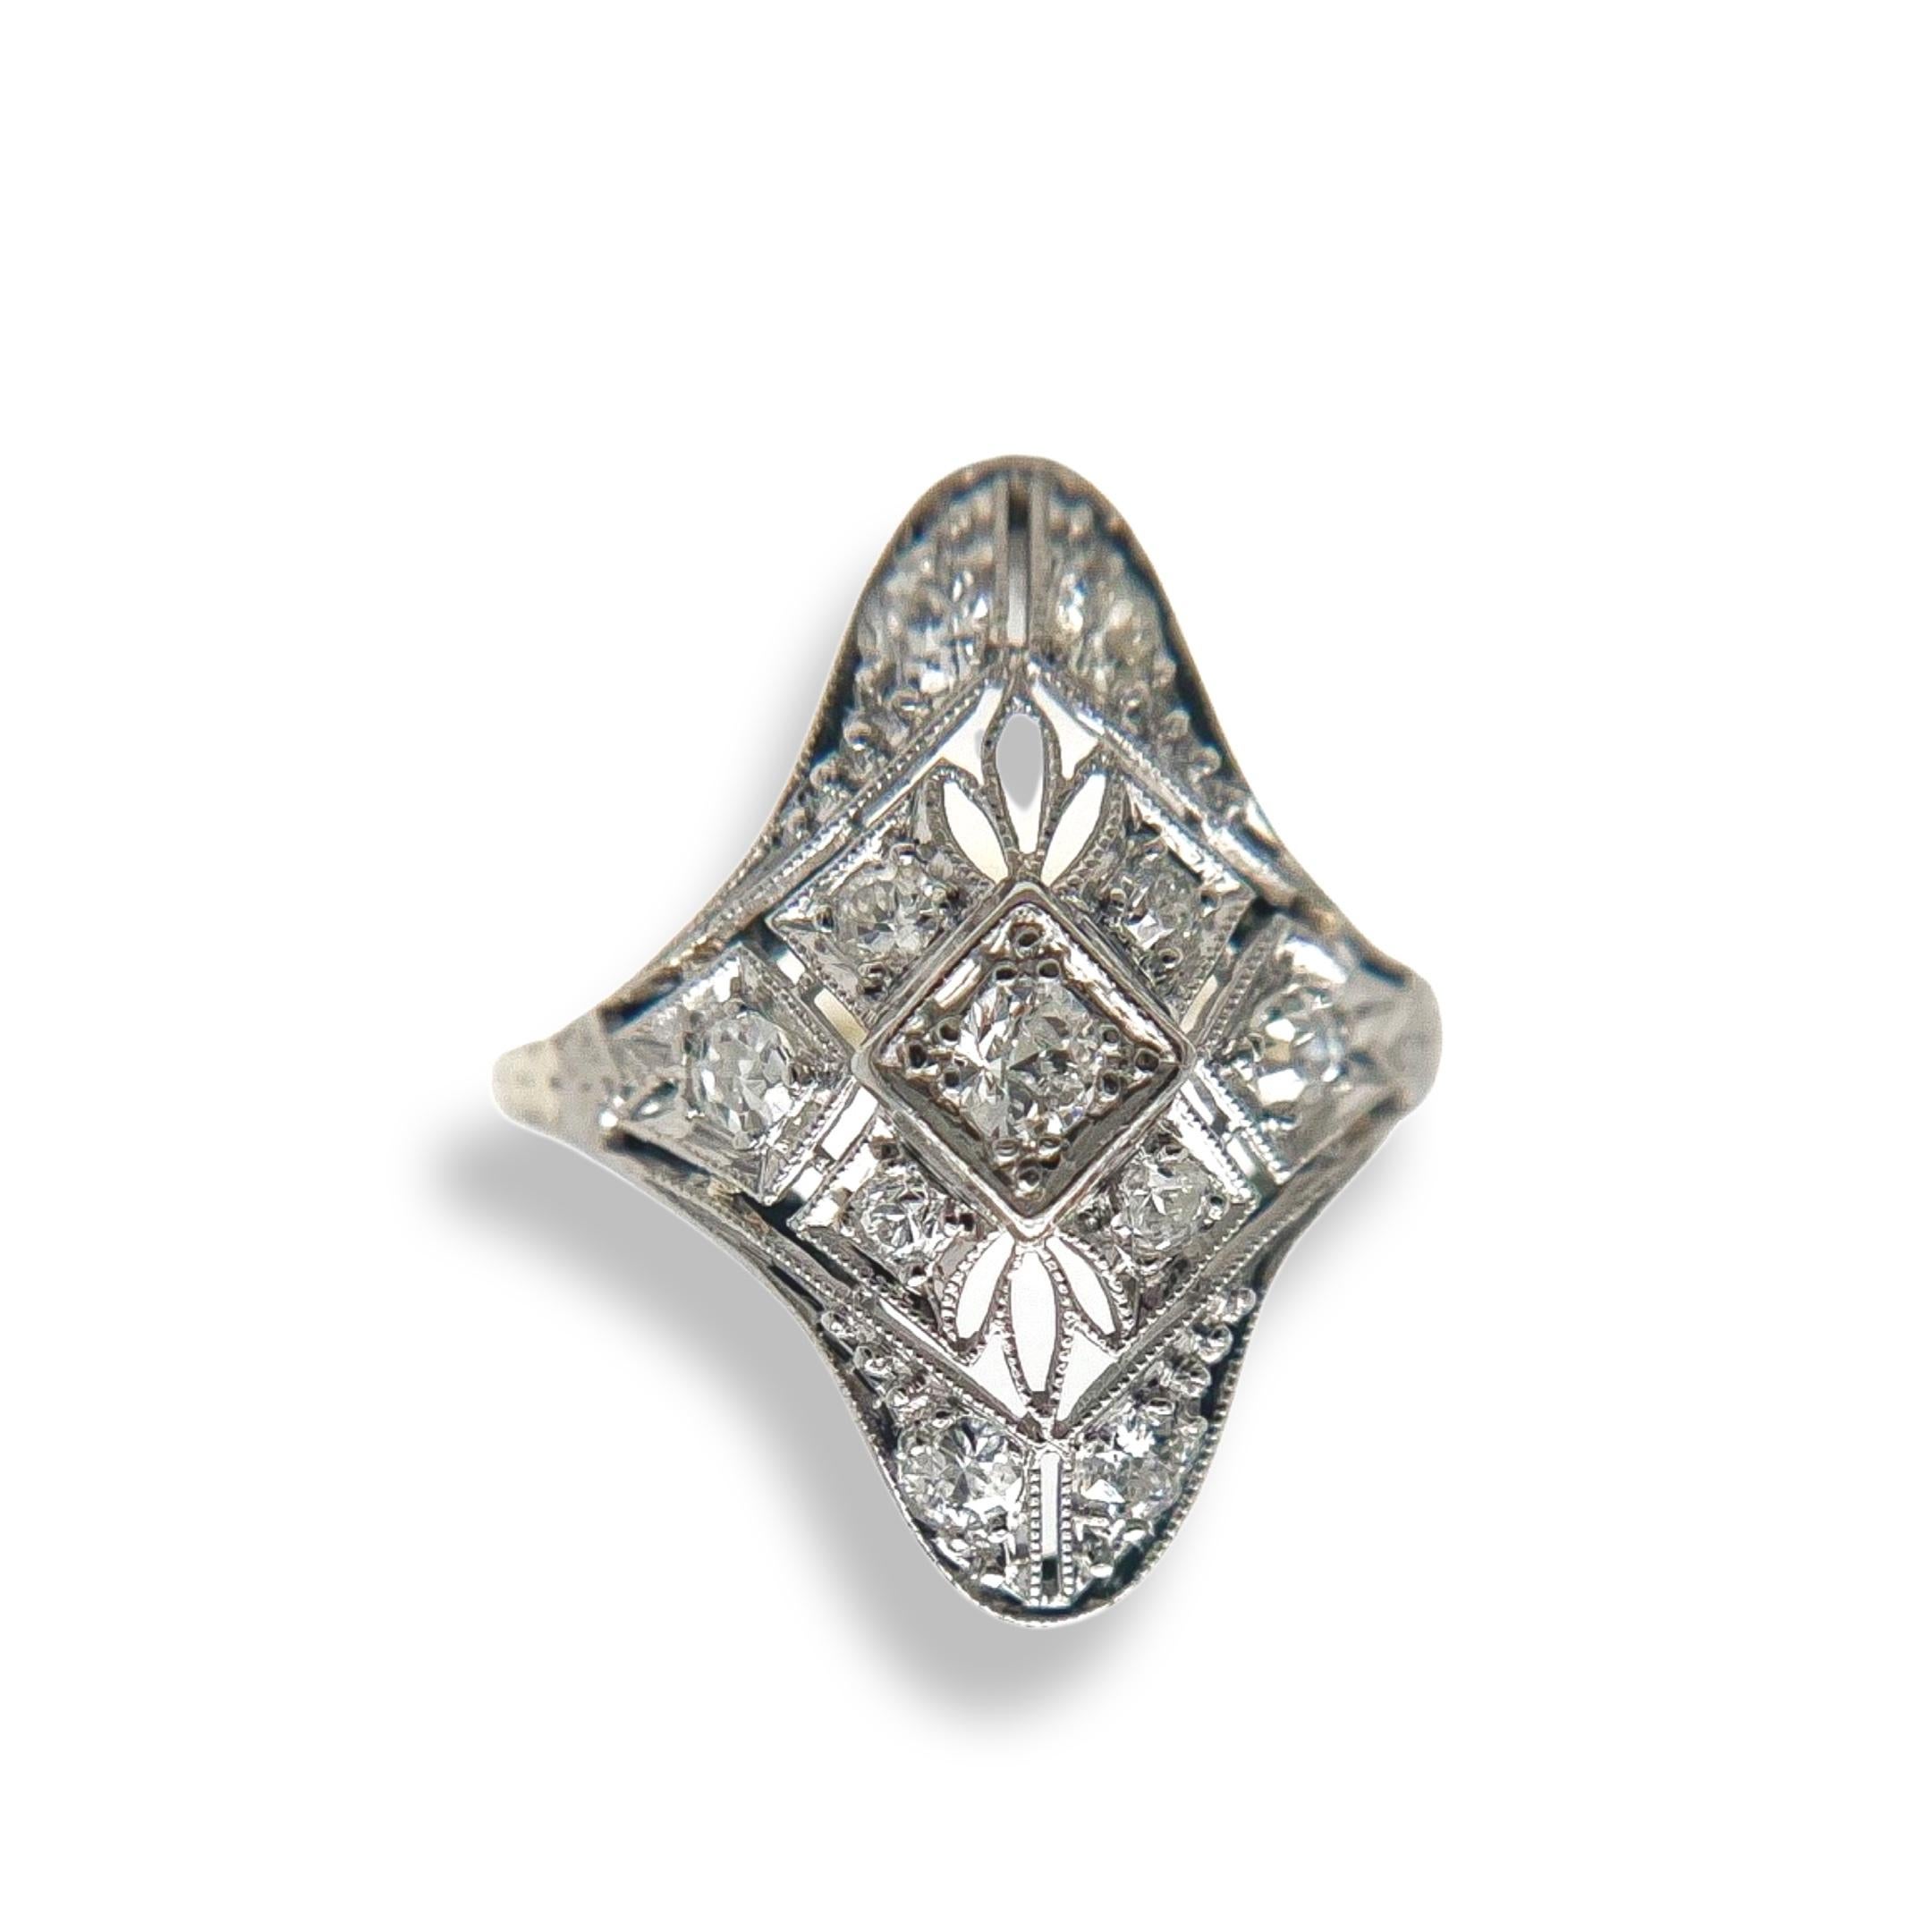 This antique diamond ring was handcrafted sometime during the Edwardian design period (1900-1920). The 14K white gold setting features intricate filigree, precise milgrain accents, and beautiful hand engravings.
 
Crafted with meticulous attention